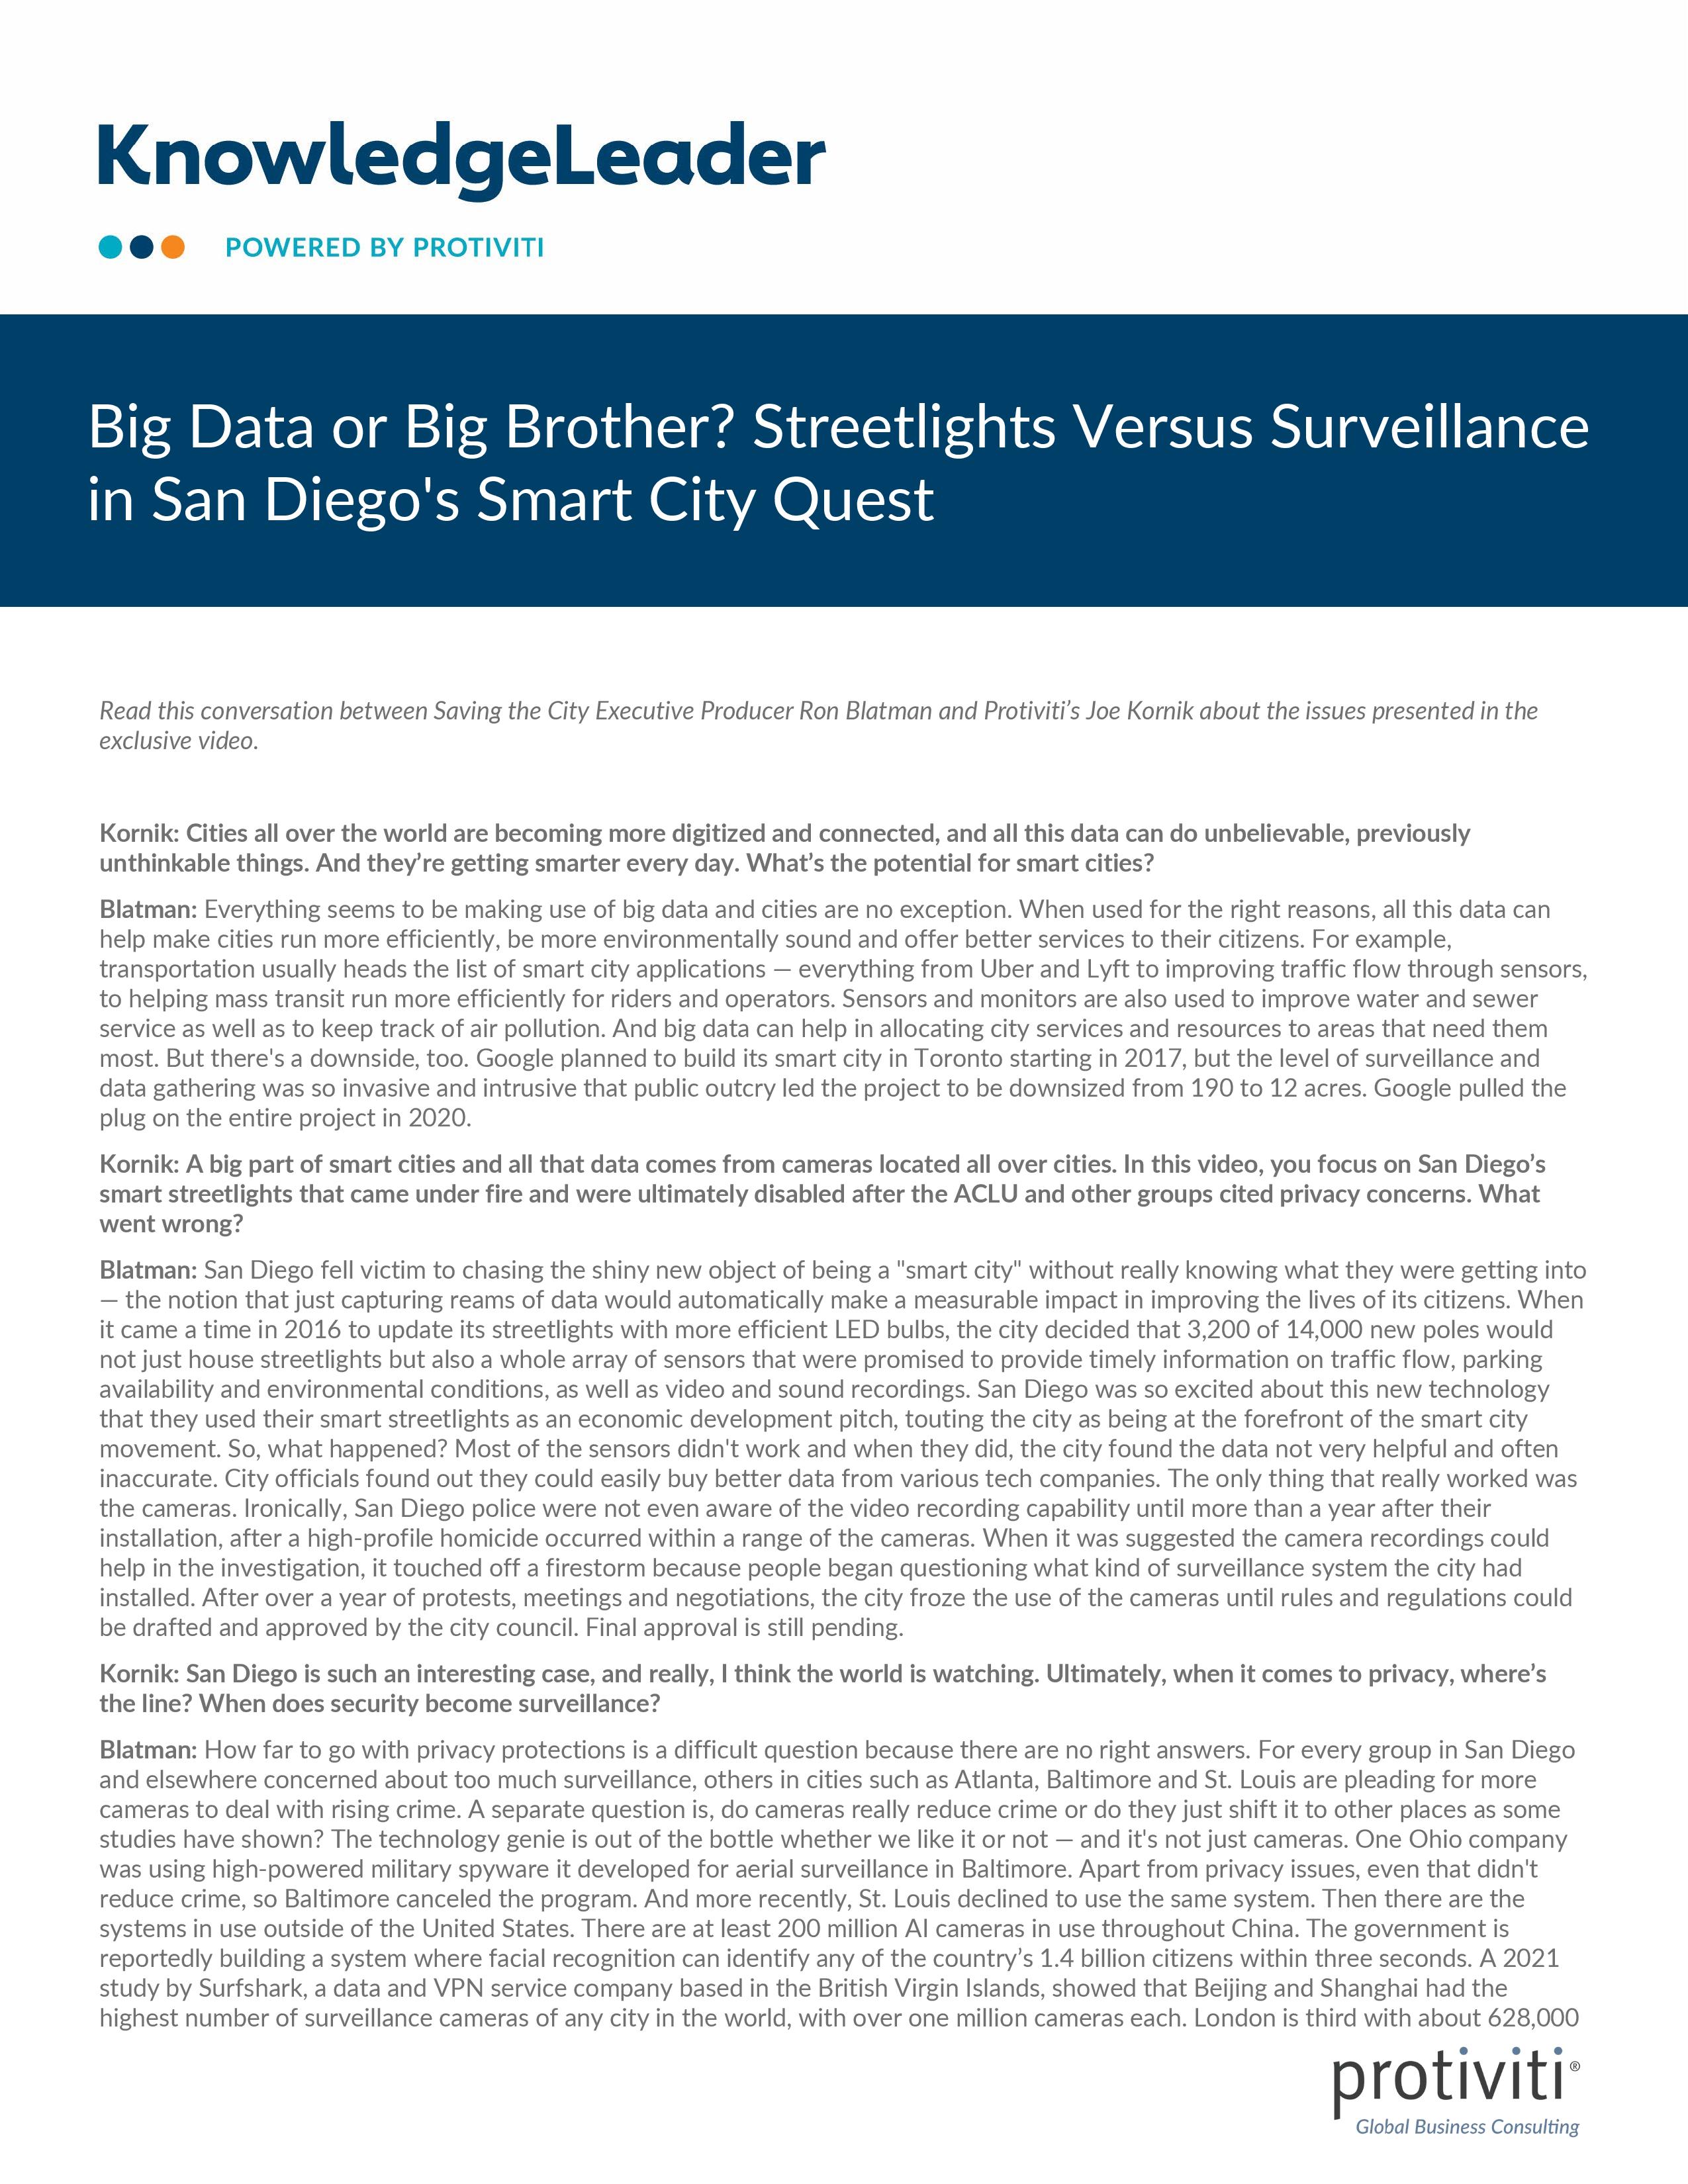 Screenshot of the first page of Big Data or Big Brother Streetlights Versus Surveillance in San Diego s Smart City Quest